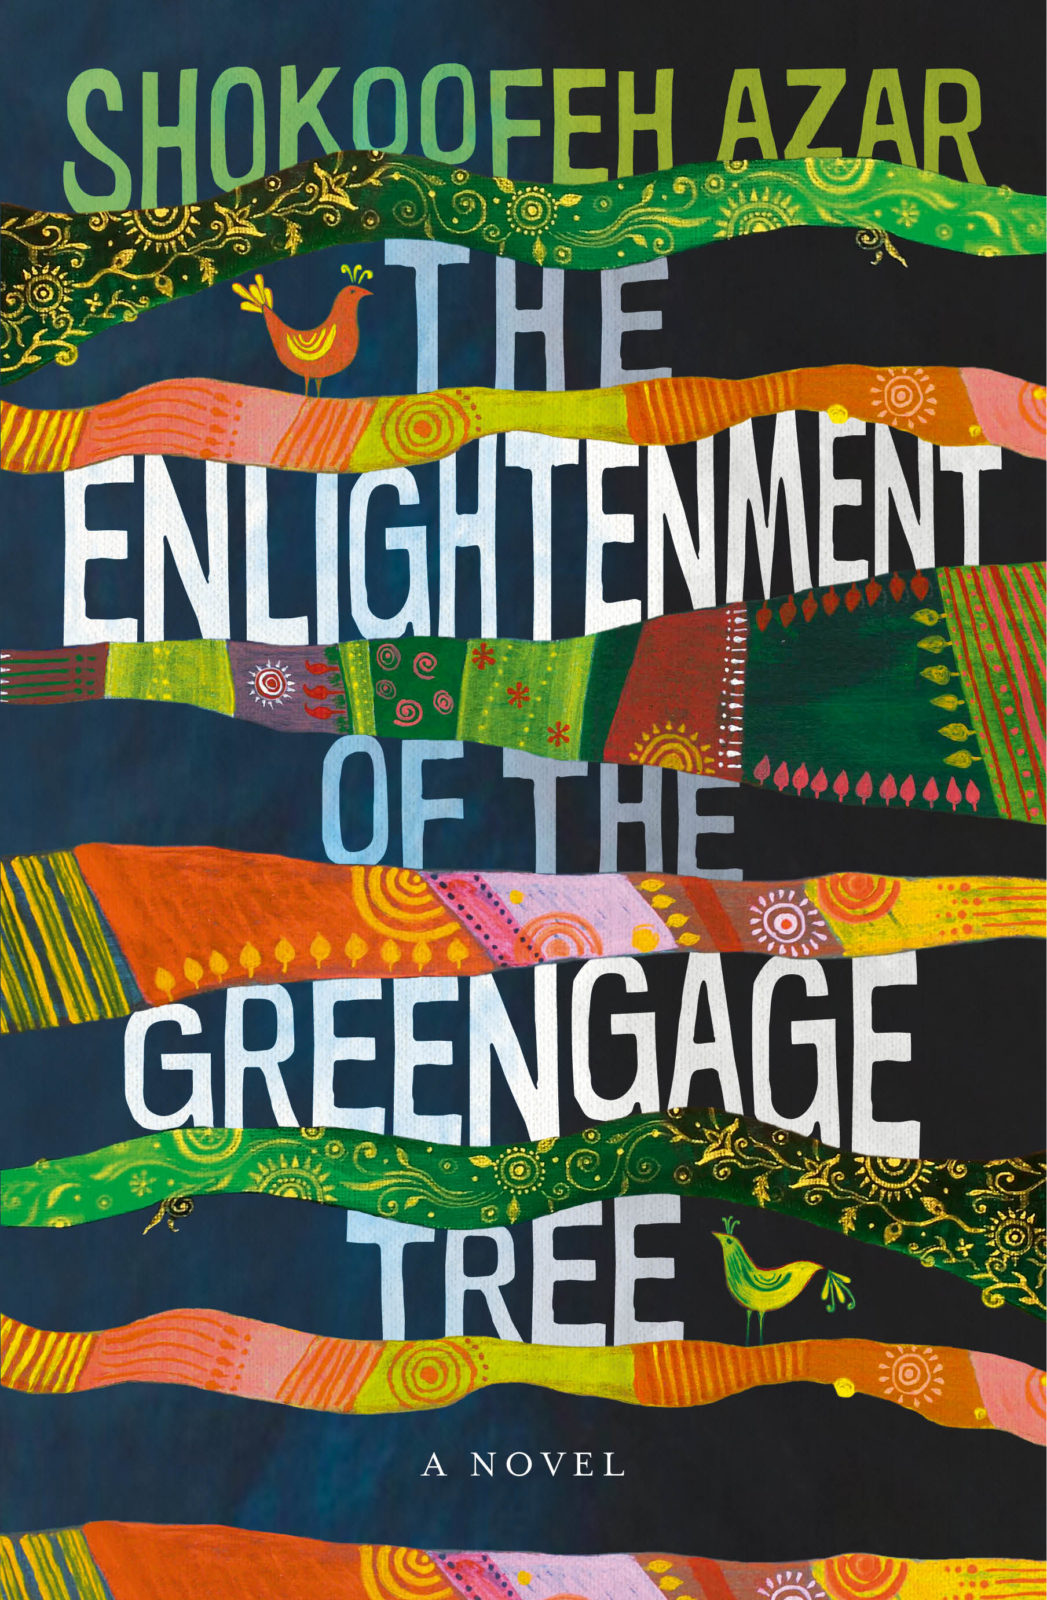 Cover of Shokoofeh Azar's "The Enlightenment of the Greengage Tree" (published by Europa Editions)